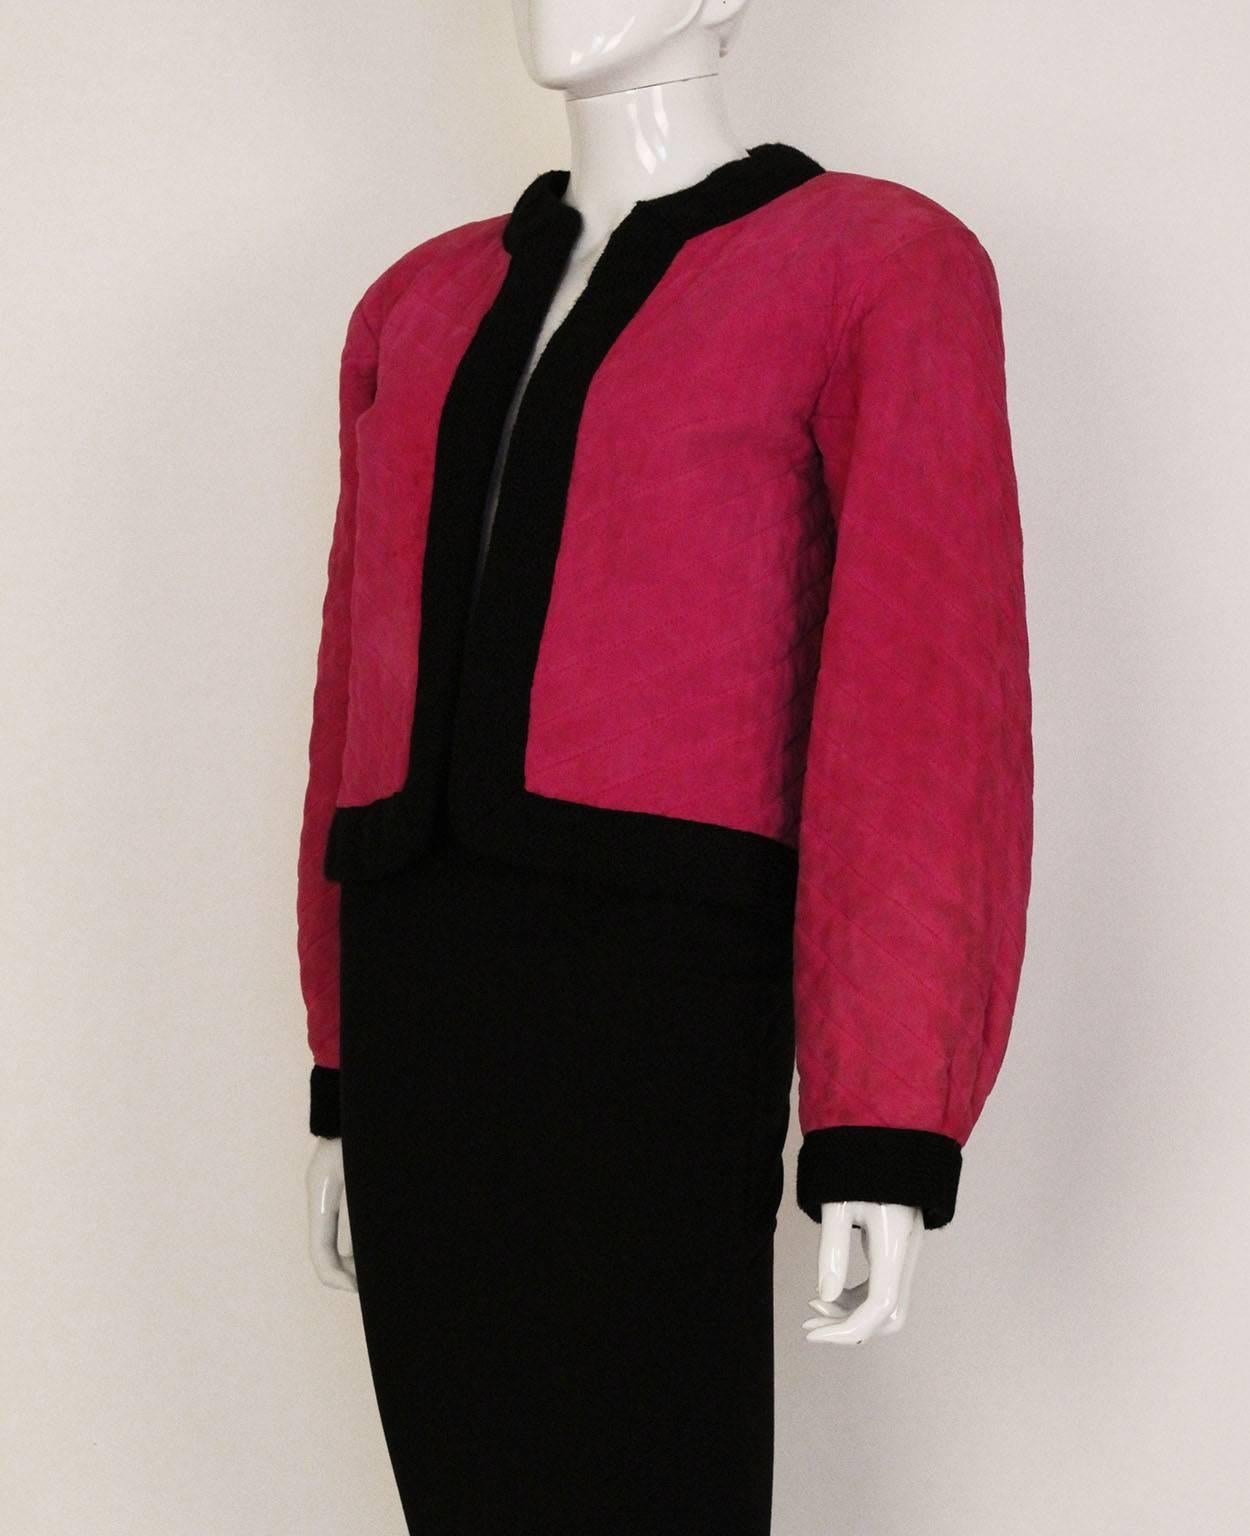 A colourful  and chic jacket by Yves Saint Laurent, model style V285. The jacket is in a powerful pink quilted  suede, with a bright red wool/cotton mix lining. The cuffs,hem, collar and front opening are trimmed in black wool. The jacket is